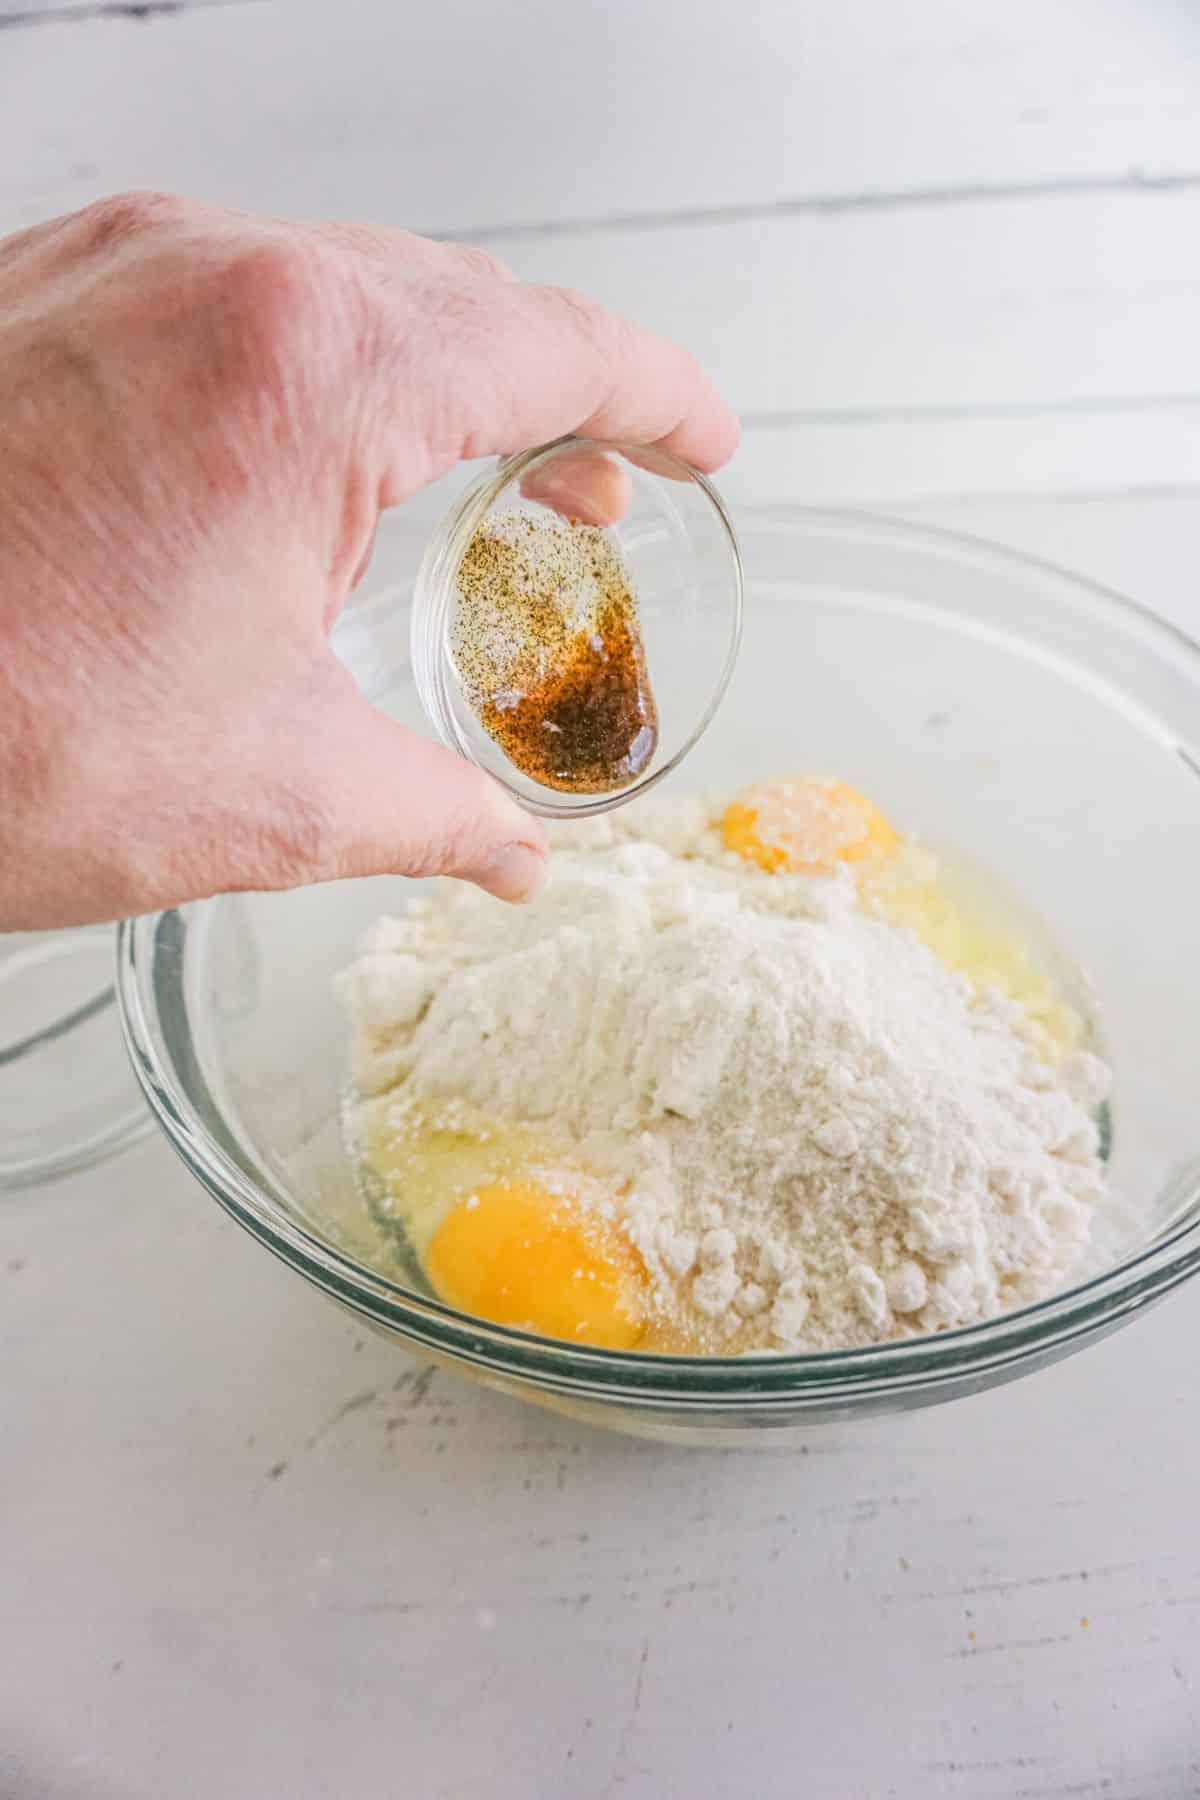 In a large mixing bowl, vanilla extract is added to cake mix with egg.